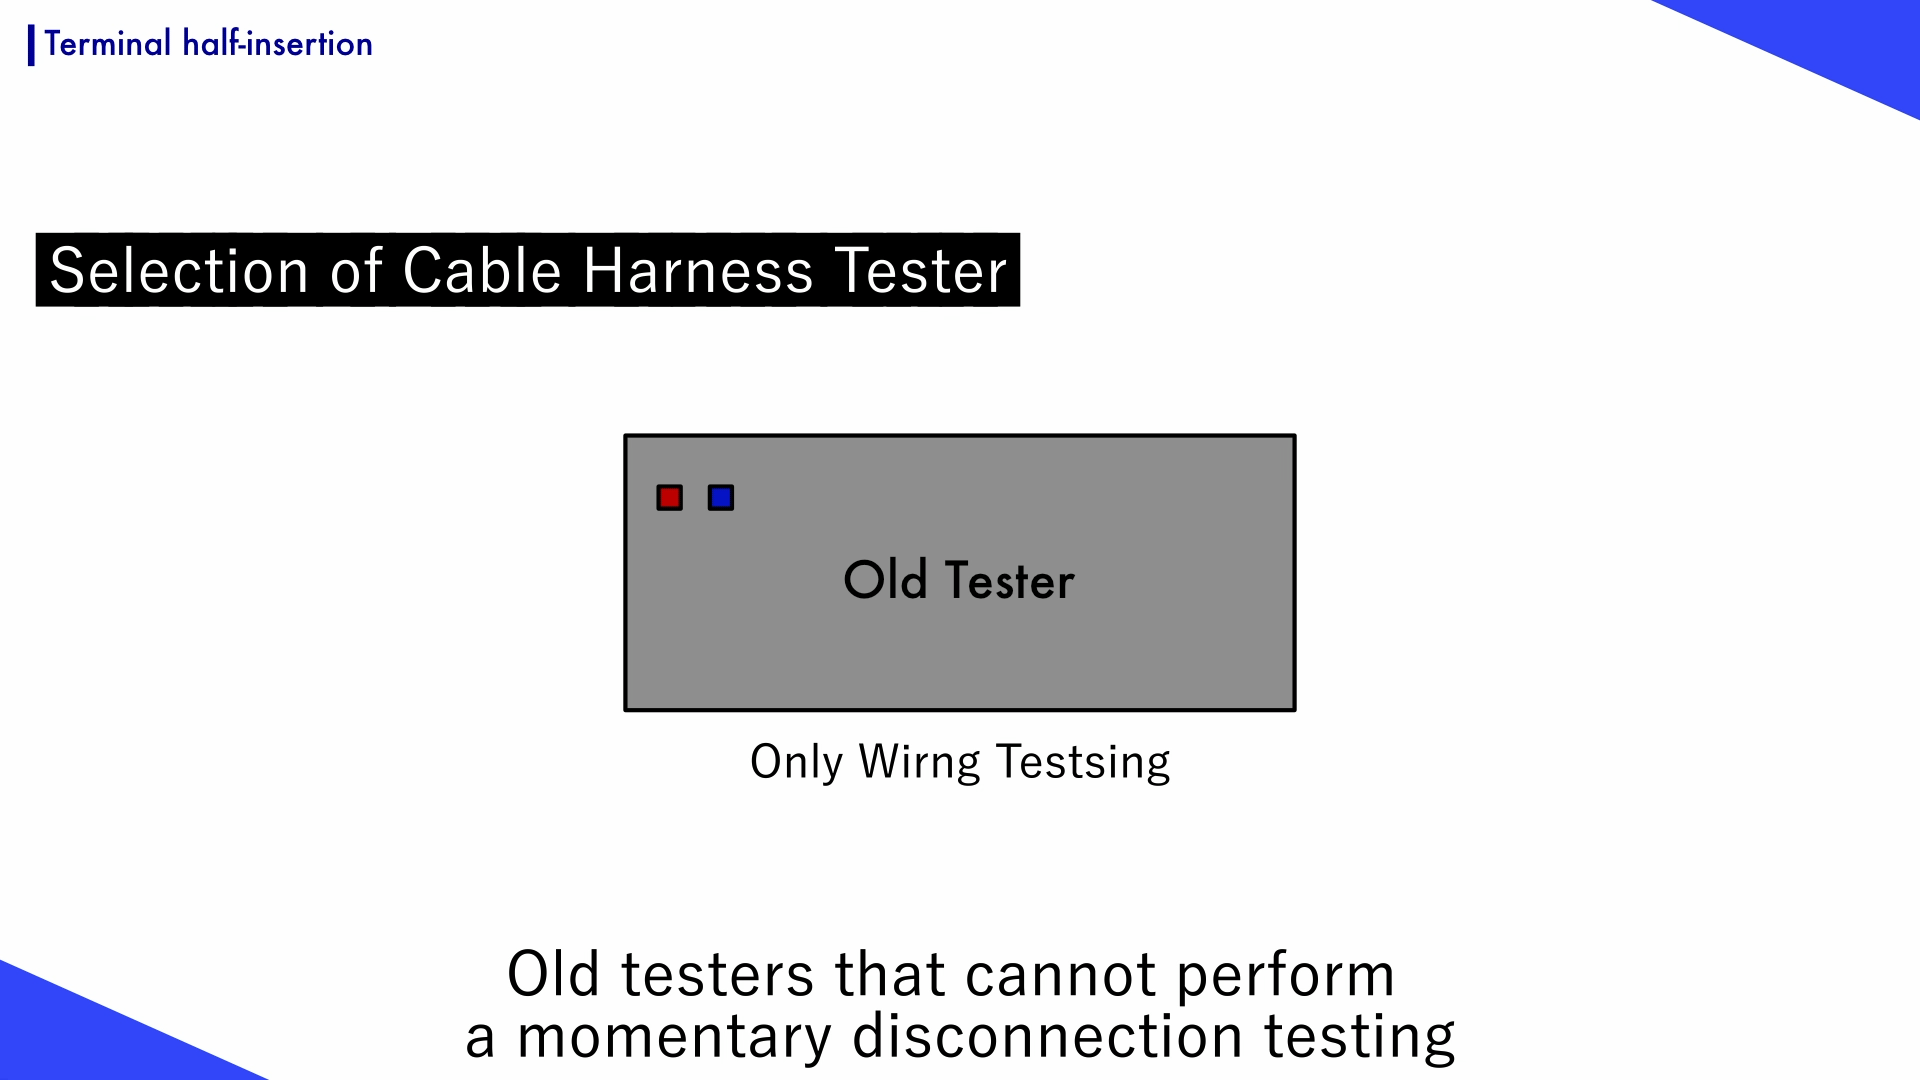 Old cable tester cannot check for momentary disconnections 